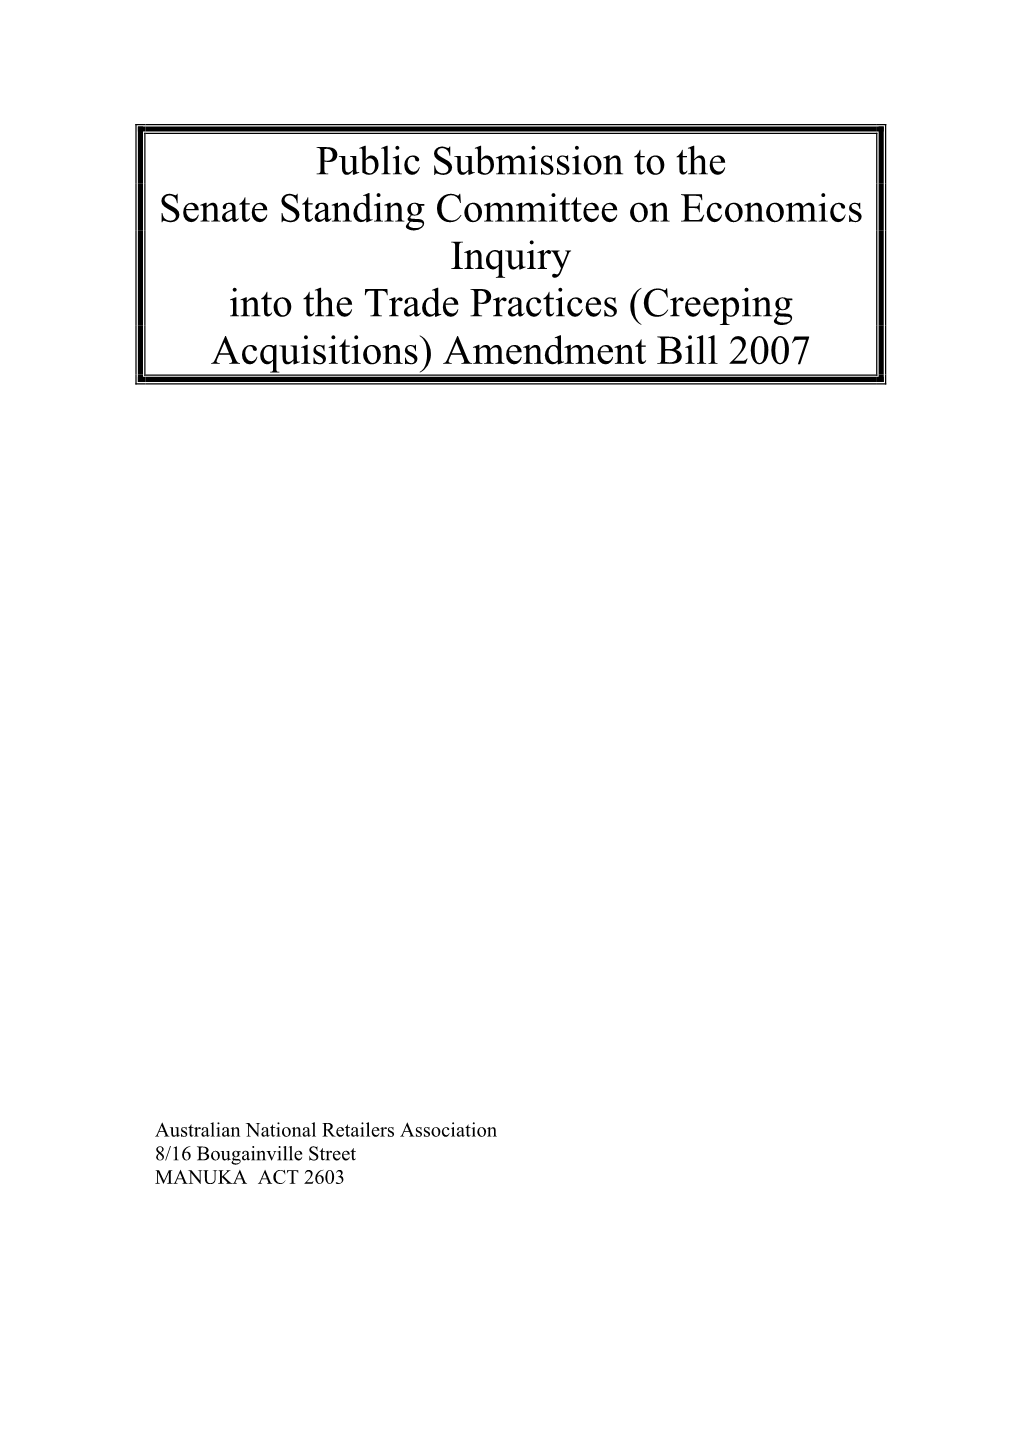 Submission to the Senate Standing Committee on Economics Inquiry Into the Trade Practices (Creeping Acquisitions) Amendment Bill 2007